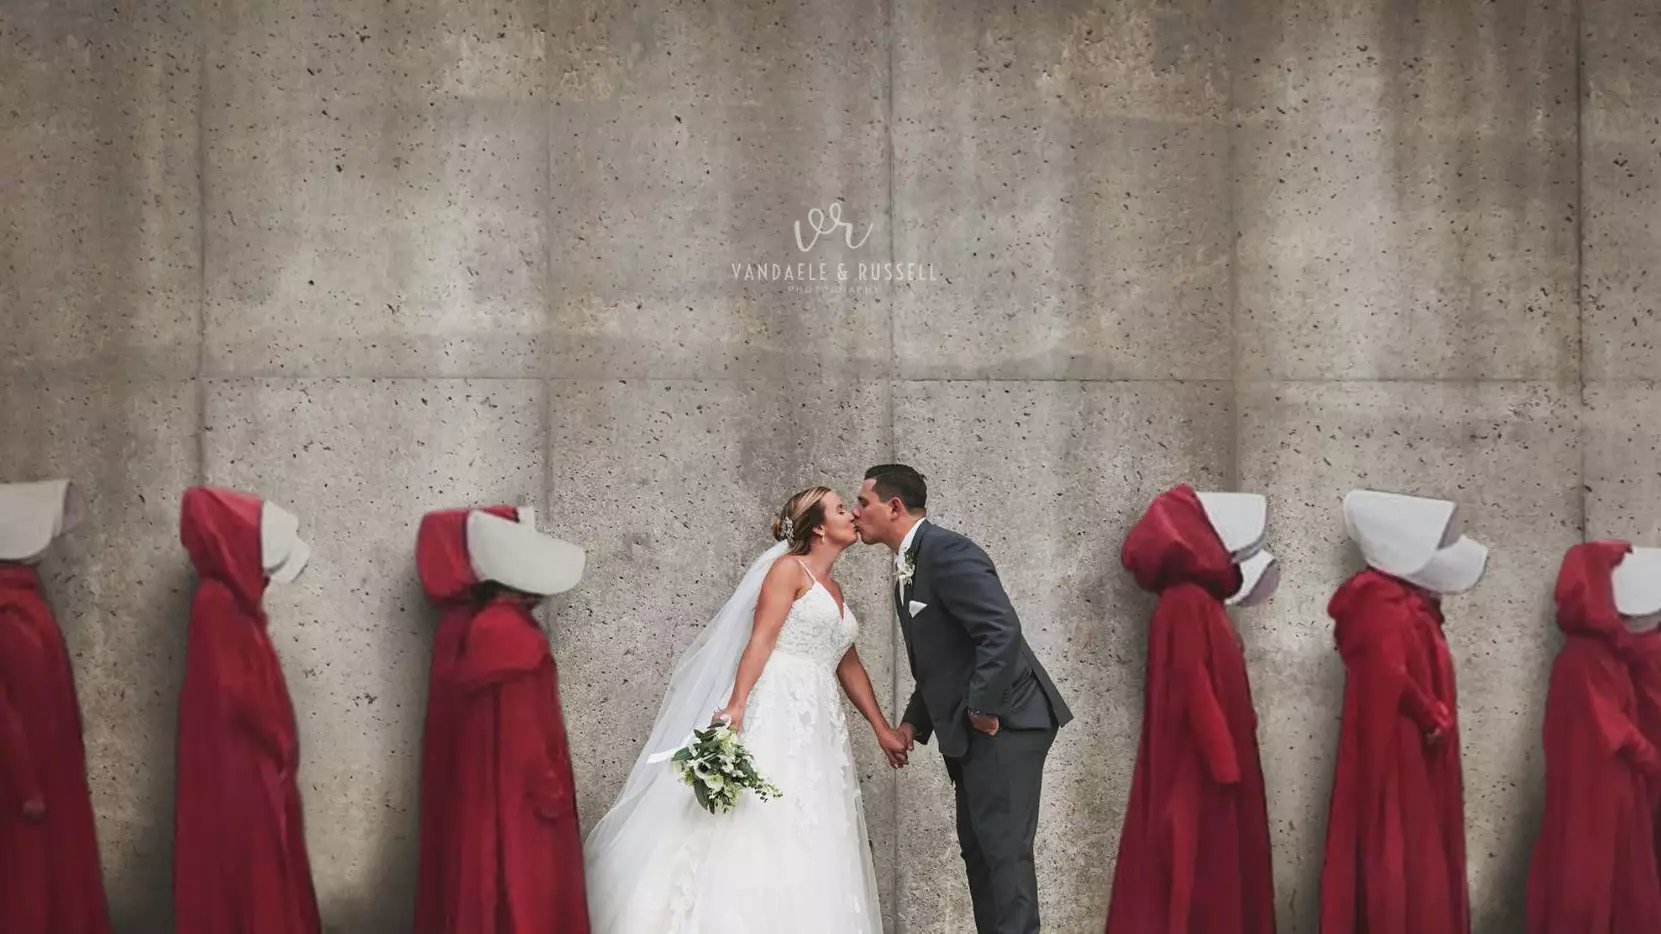 Couple Criticised For Wedding Photographs Inspired By The Handmaid's Tale